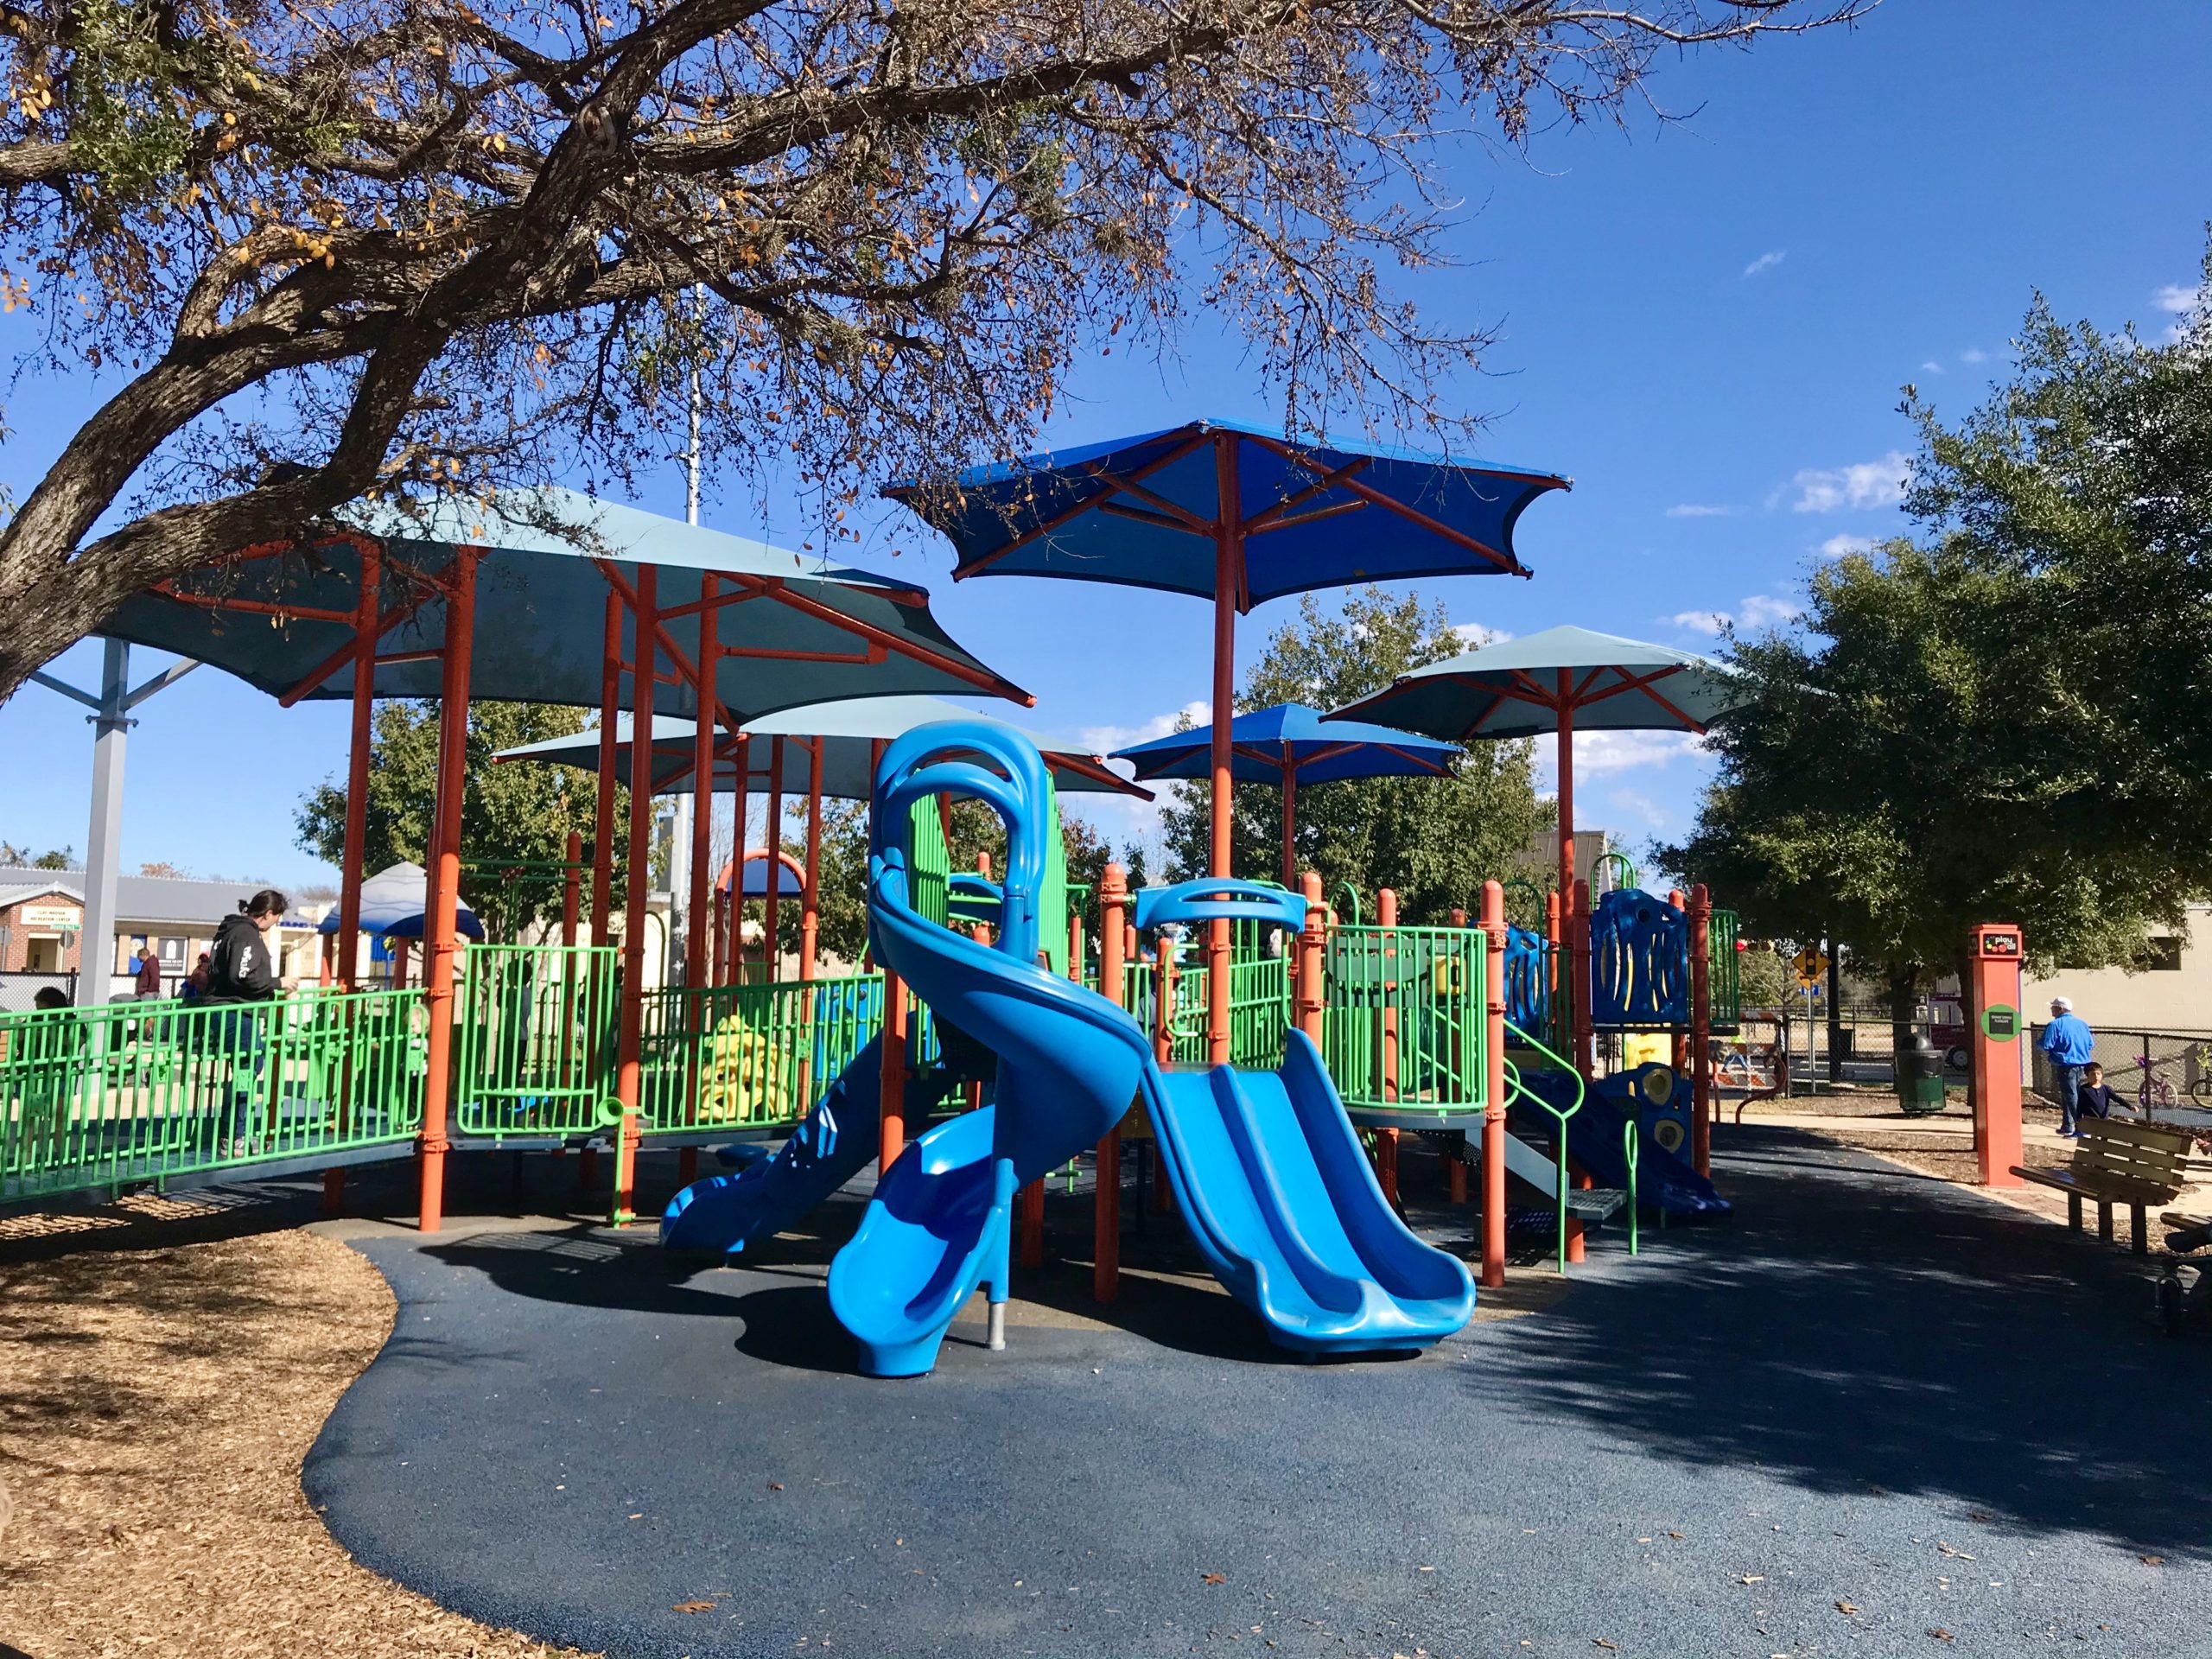 Play for all Abilities Park in Round Rock